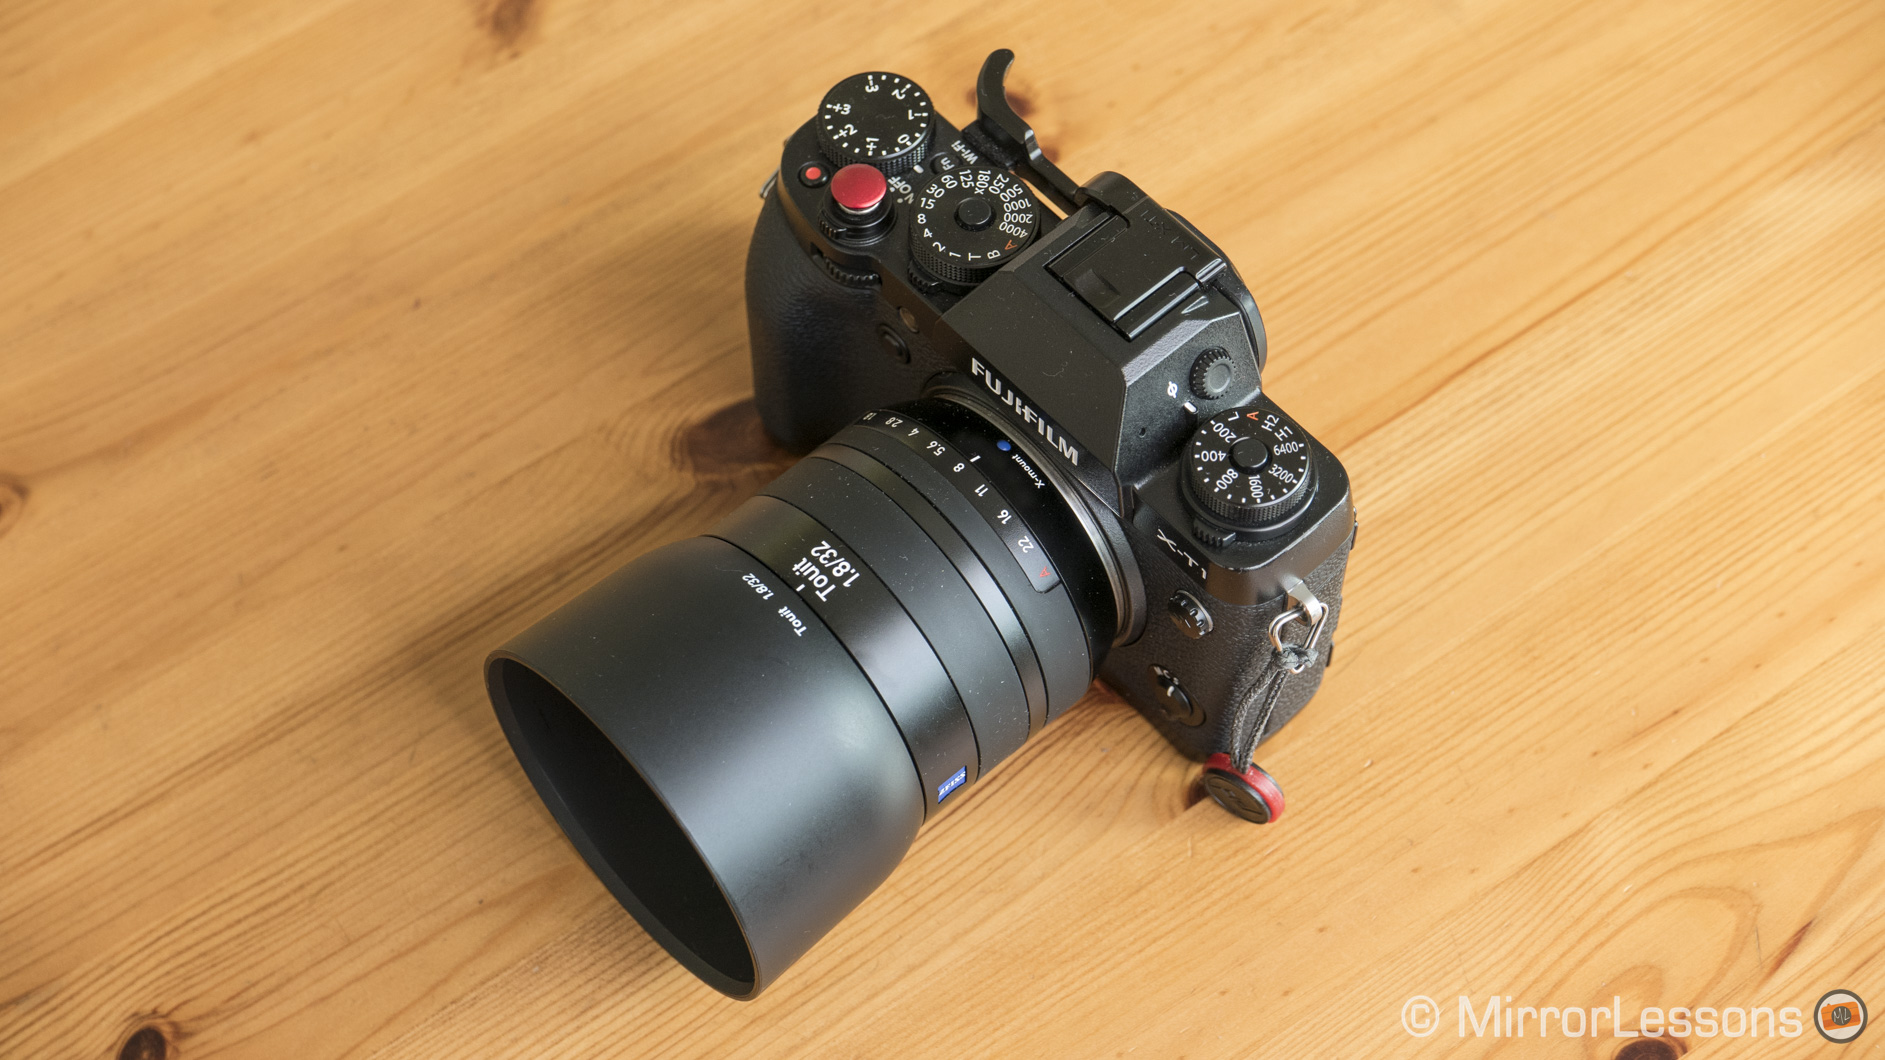 The Tale of Two Touits – Part II – Touit 32mm f/1.8 Review